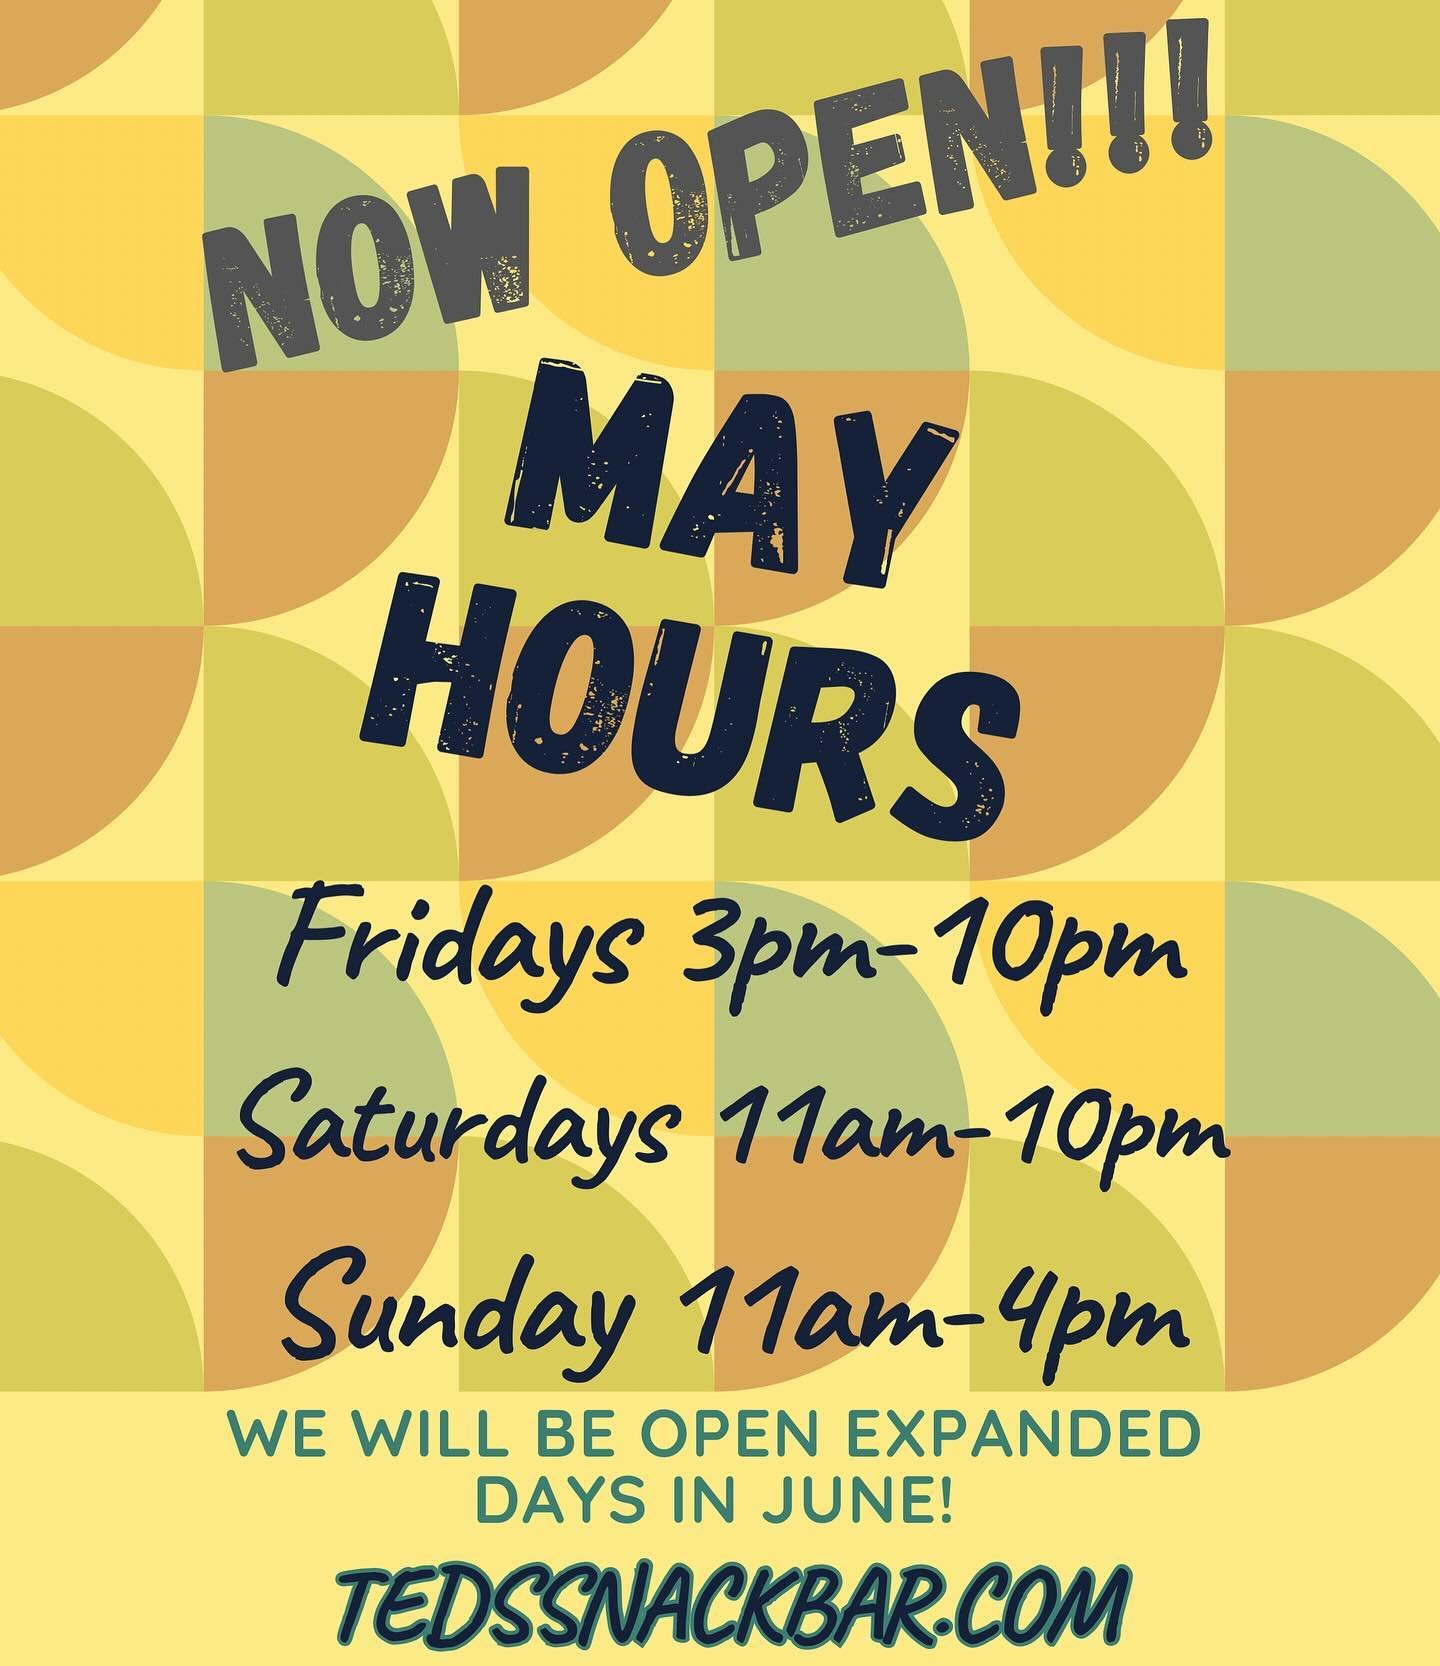 We are OPEN!!! Just in time for the DORA to kick off on Monday! 

we will only be open weekends during May until the kids are out of school, but we have some new treats lined up for this year! Come check us out !!

#teds #snackbar #dtfw #fortwayne #d